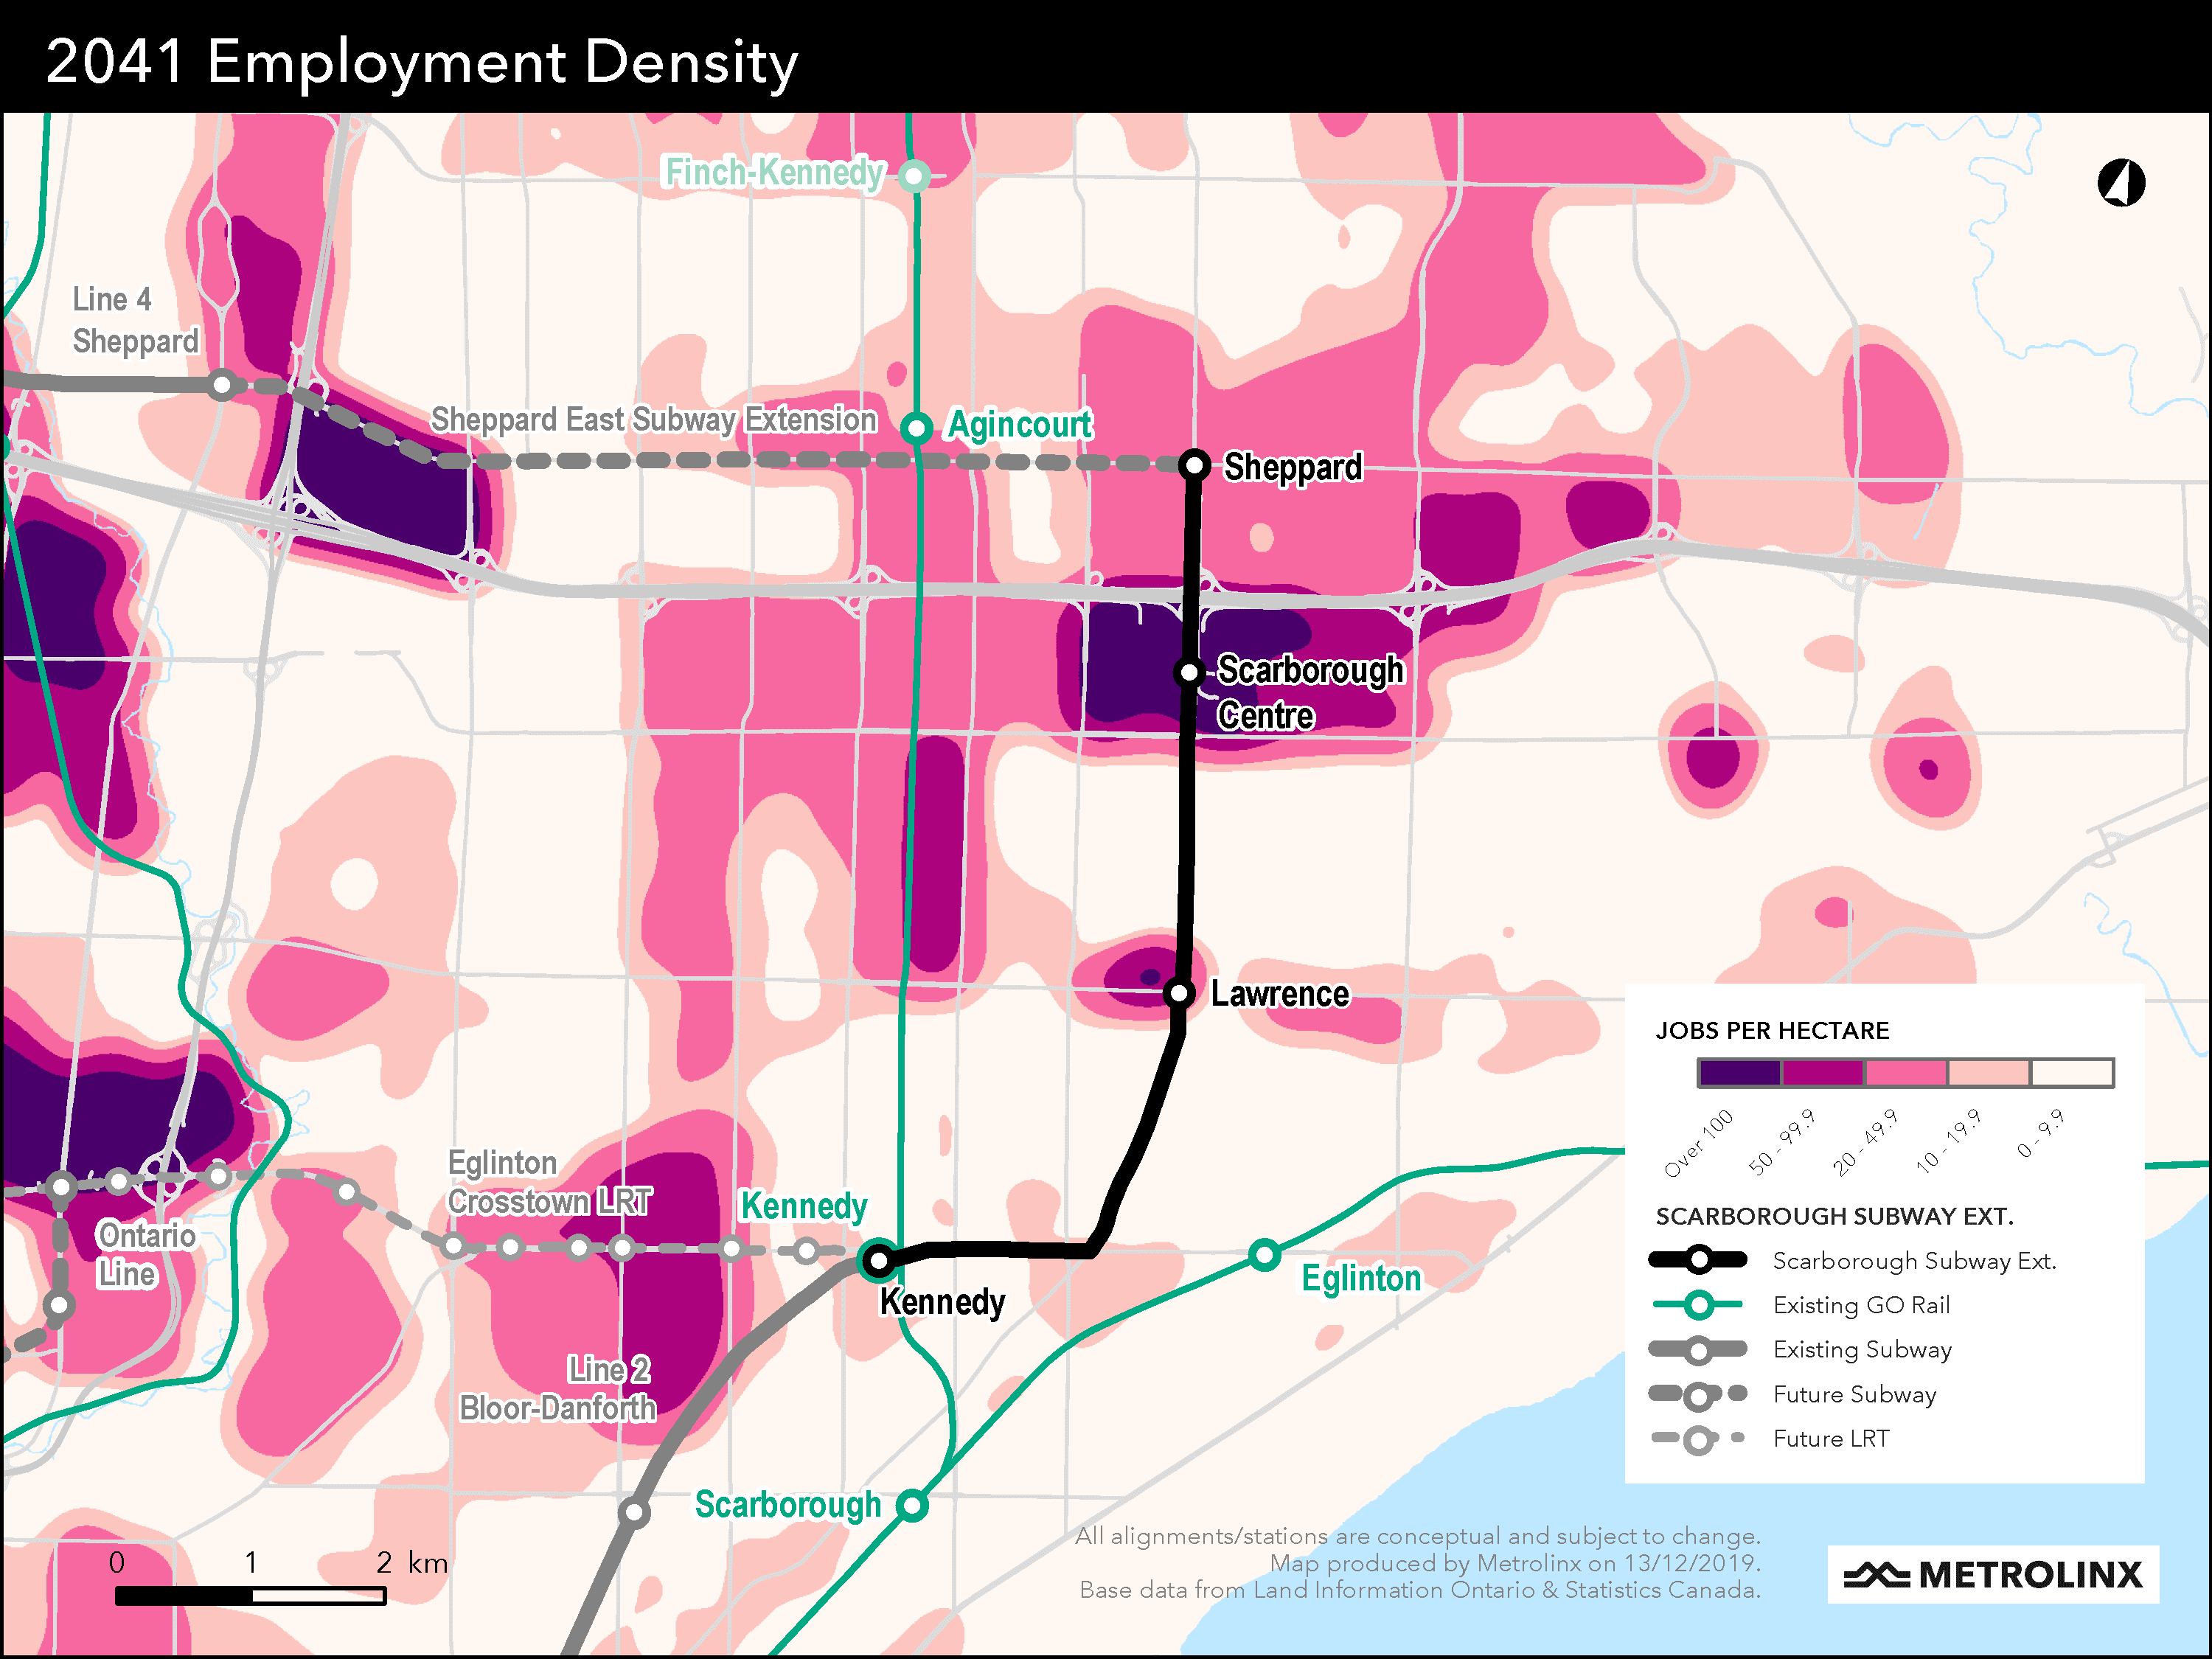 Graphic showing projections for employment density in the area served by the Scarborough Subway E...